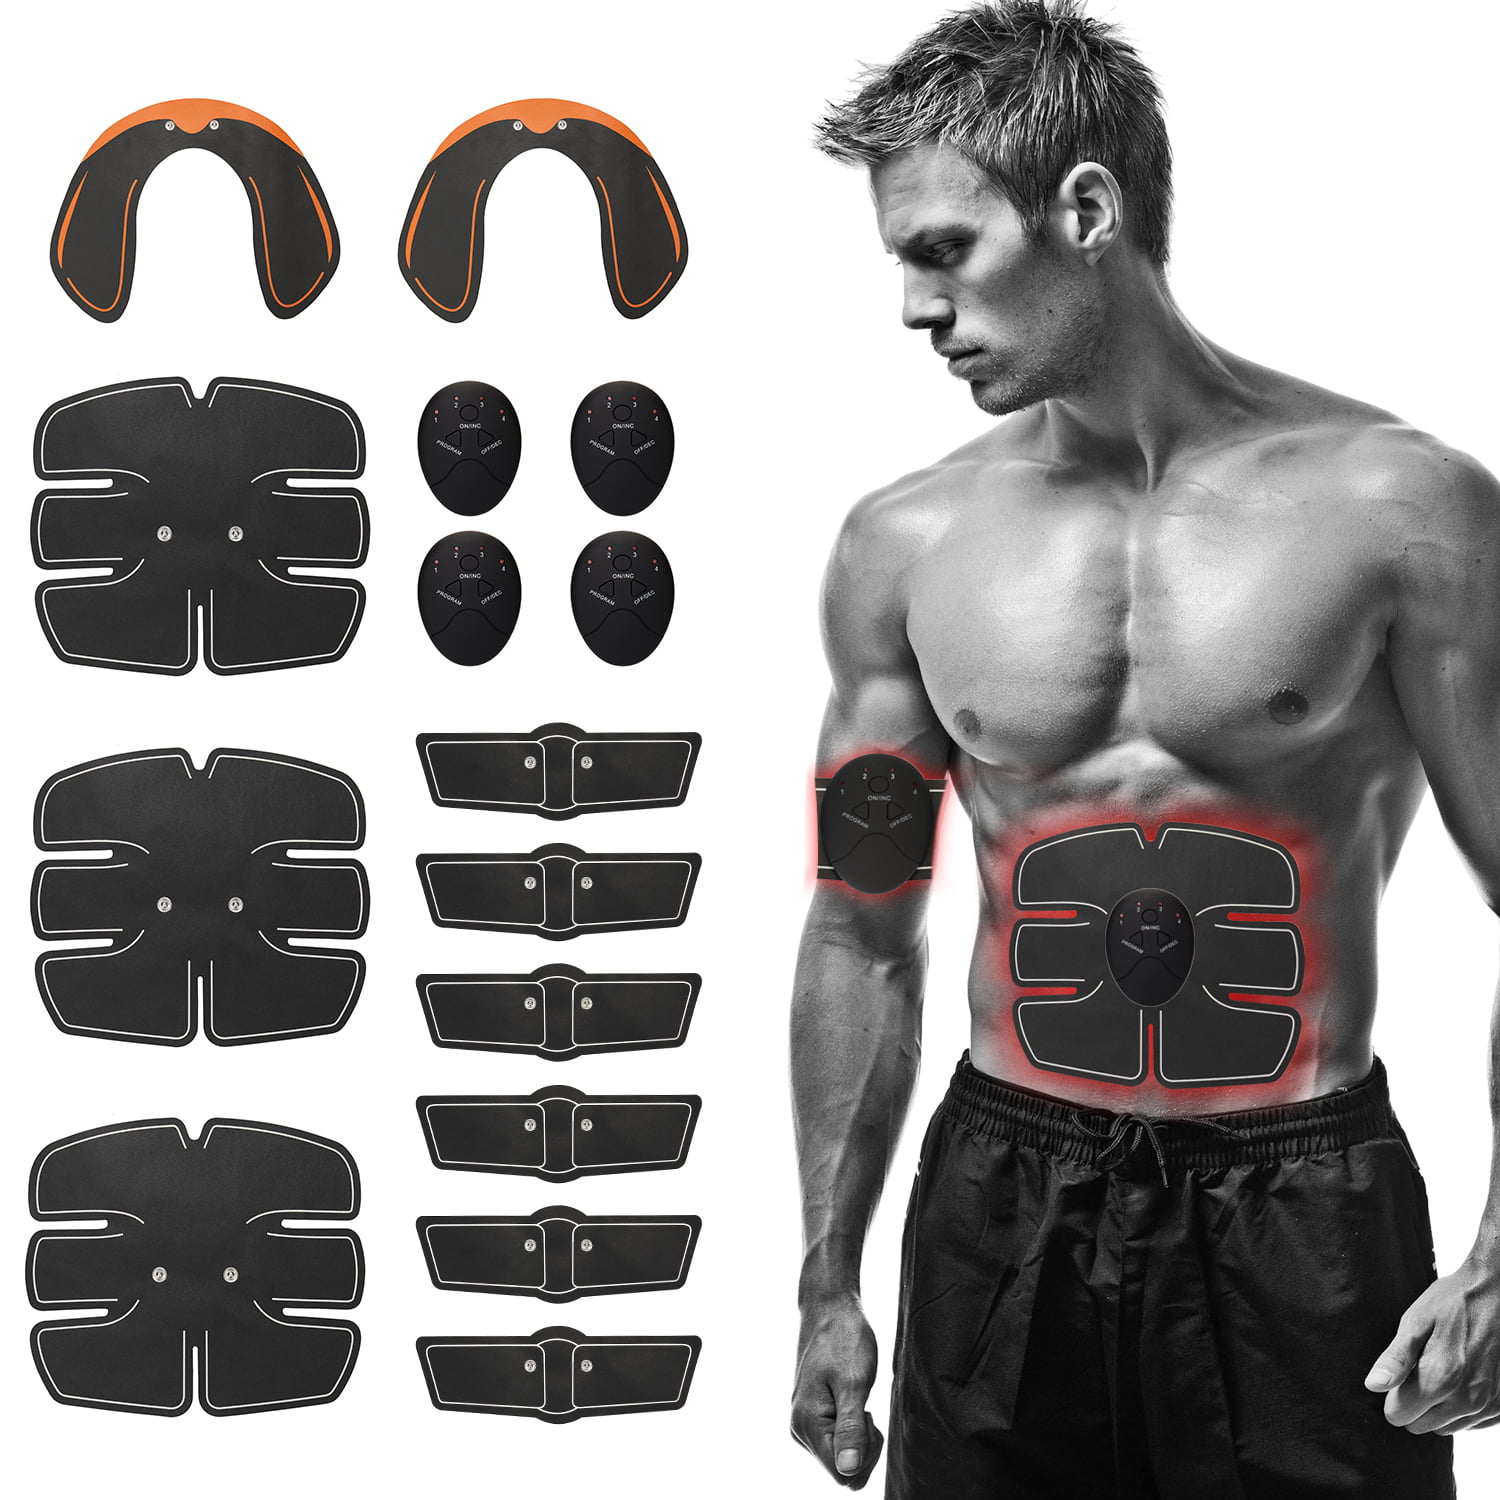 Ultimate ABS Simulator Waist Training Body Abdominal Muscle Exerciser pro 